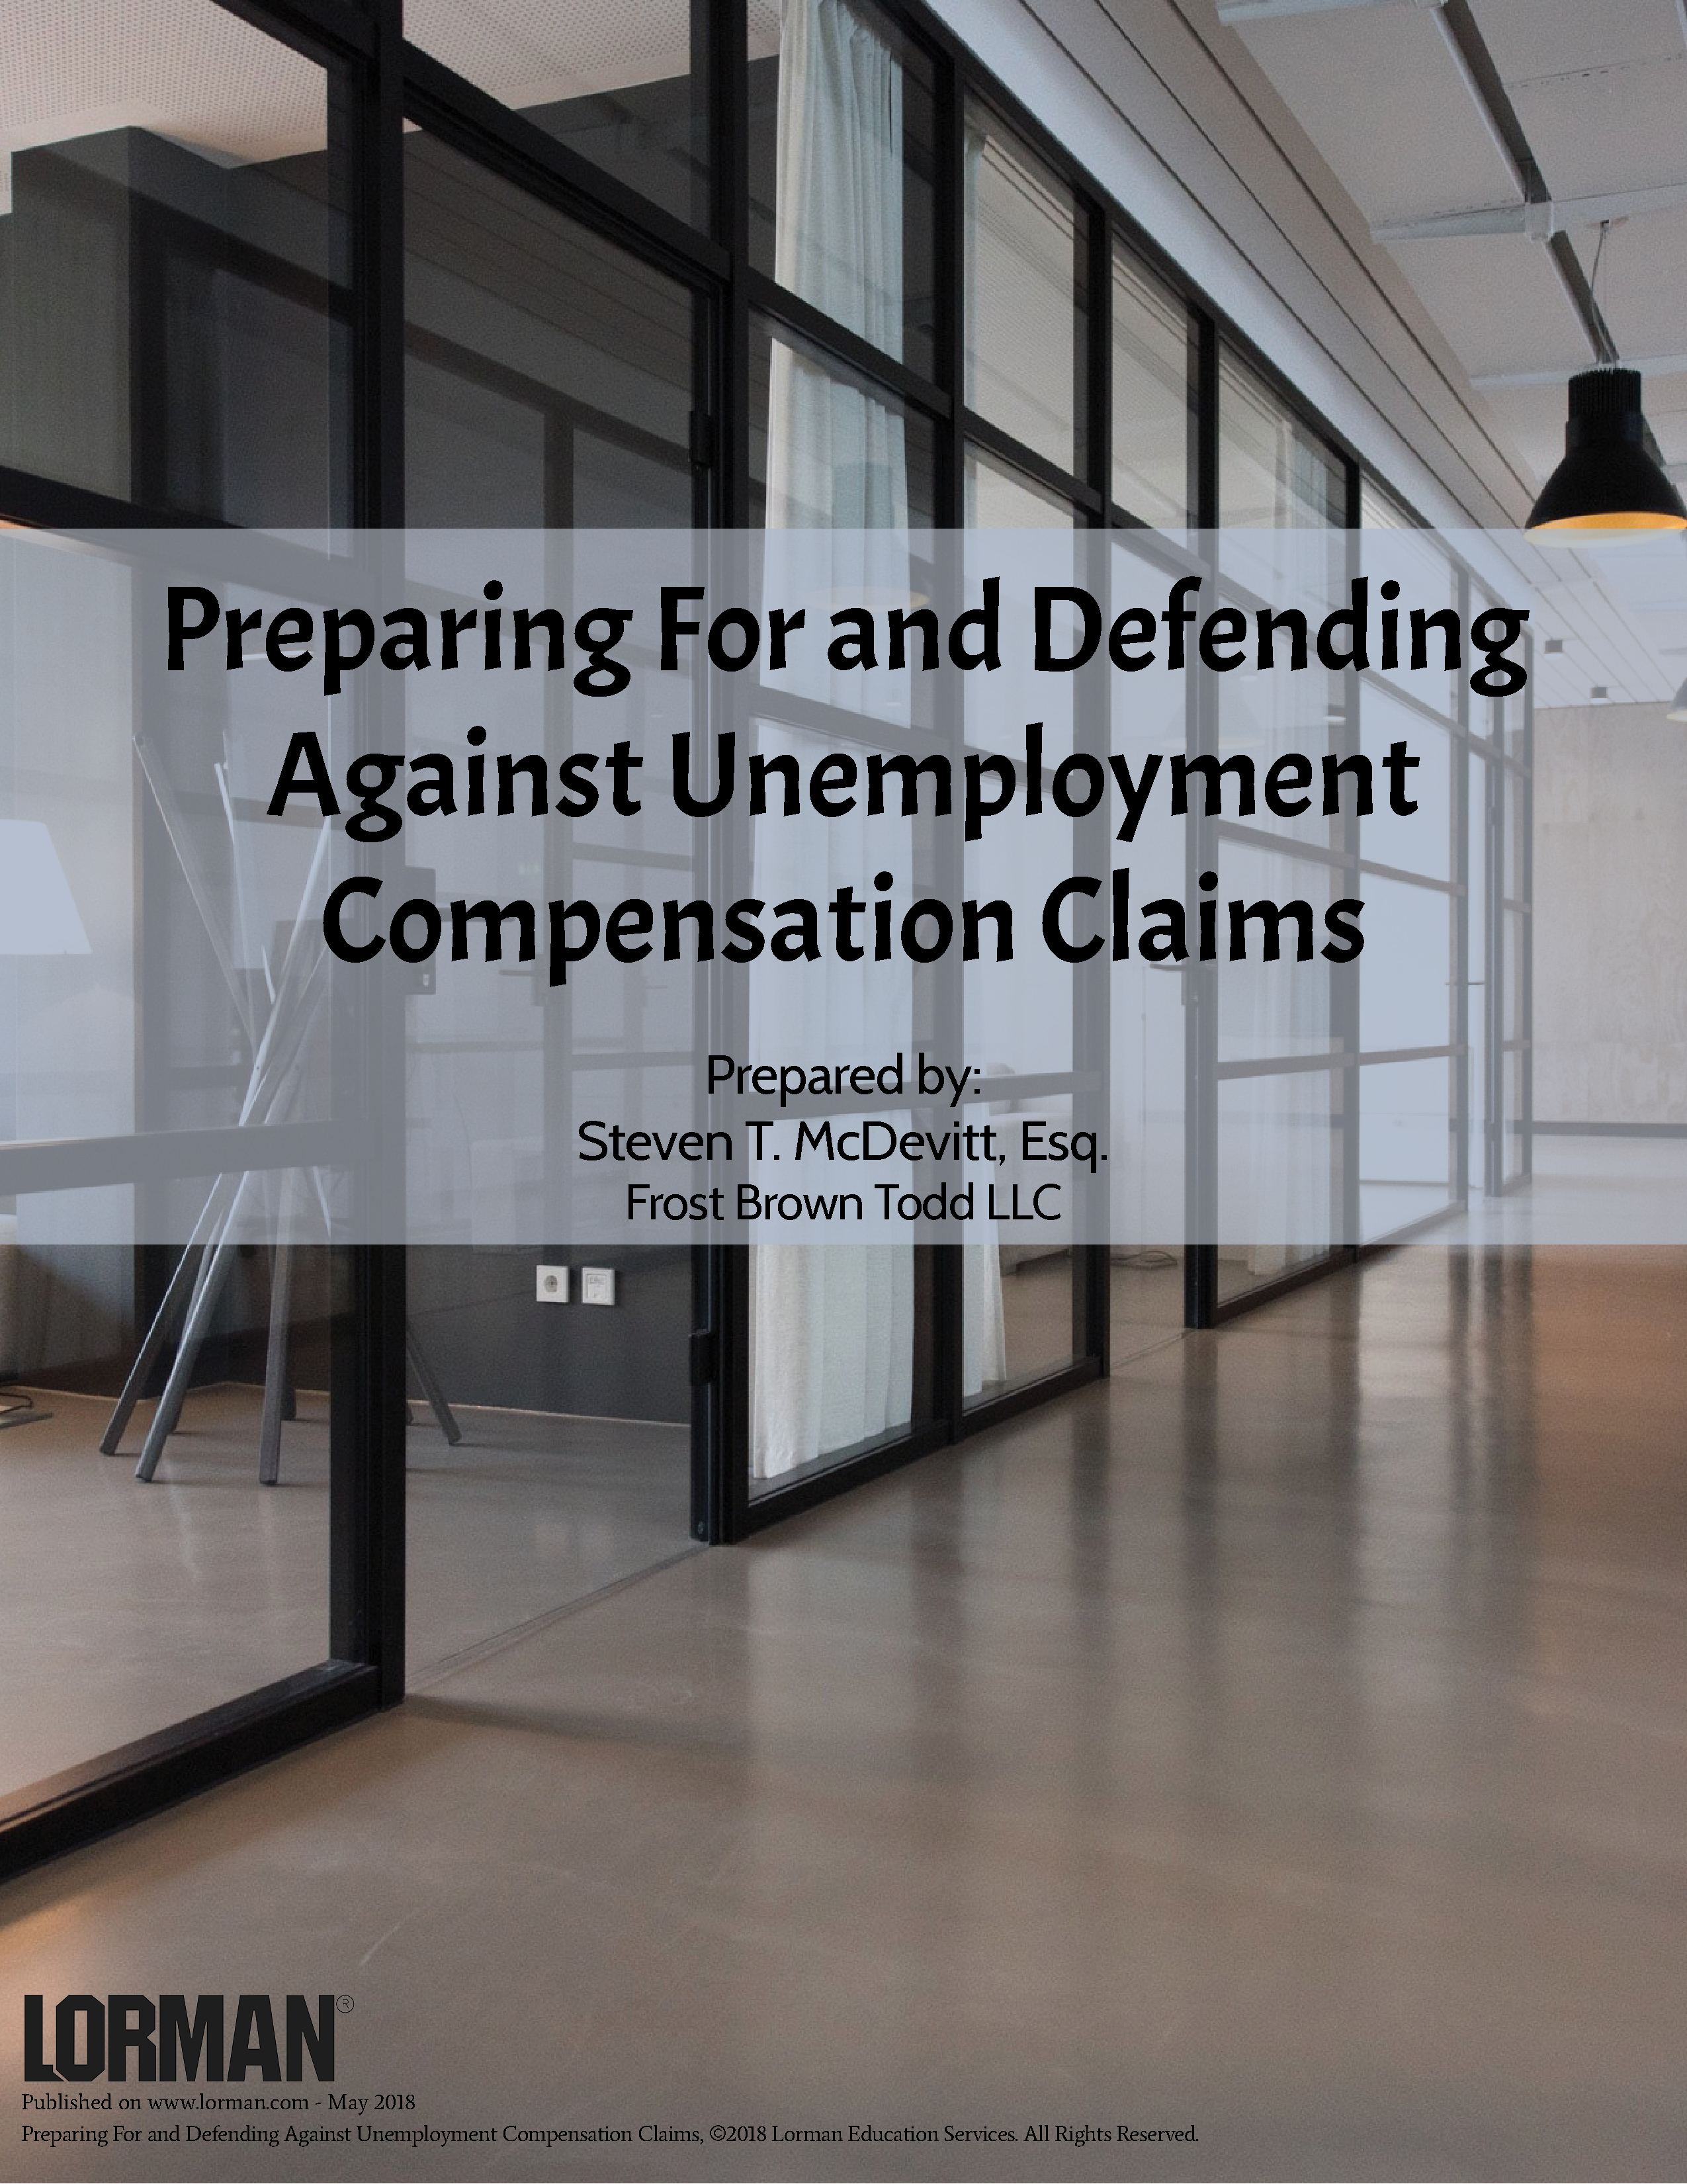 Preparing For and Defending Against Unemployment Compensation Claims